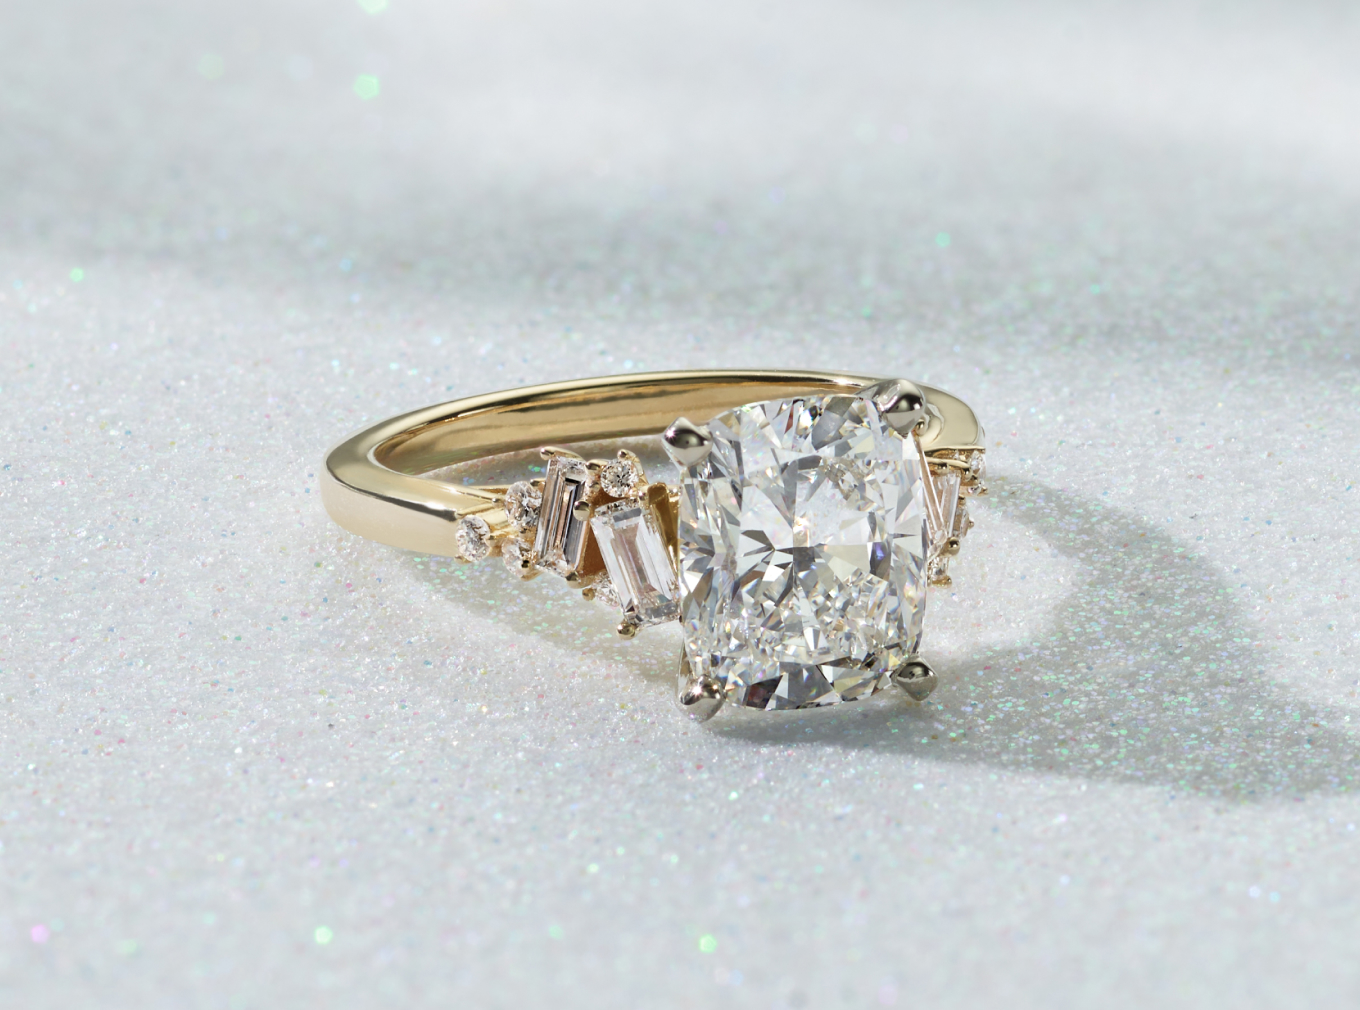 Lillian Engagement Ring Baguette and round natural diamond accents seem to dance along the band of this beautiful engagement ring setting. Crafted in warm 14-karat yellow gold, it features intricate scrollwork along the profile view for a vintage-inspired touch. Add the center stone of your dreams to complete this stunning ring. For more information on selecting your center stone, live chat online, call a customer service representative at 1-866-467-4263, or visit one of our store locations.